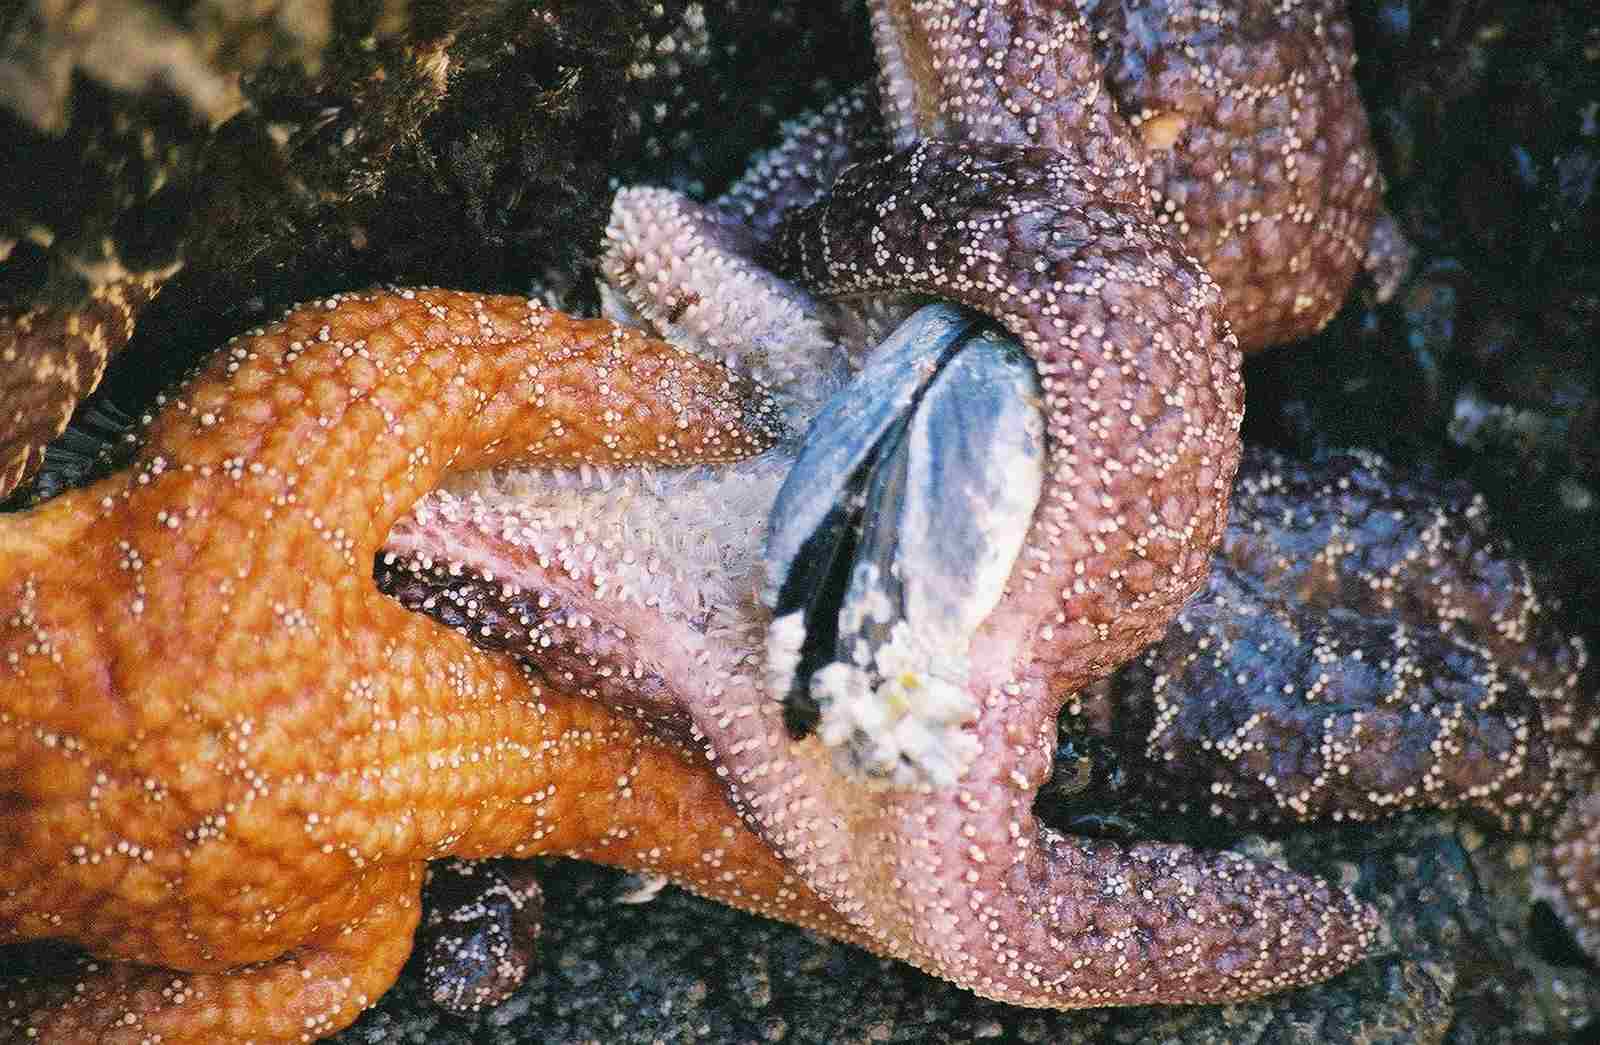 What Do Starfish Eat: Starfish Consume Prey Like Oysters Through External Digestion (Credit: Genevieve Casey 2006 .CC BY 2.0.)